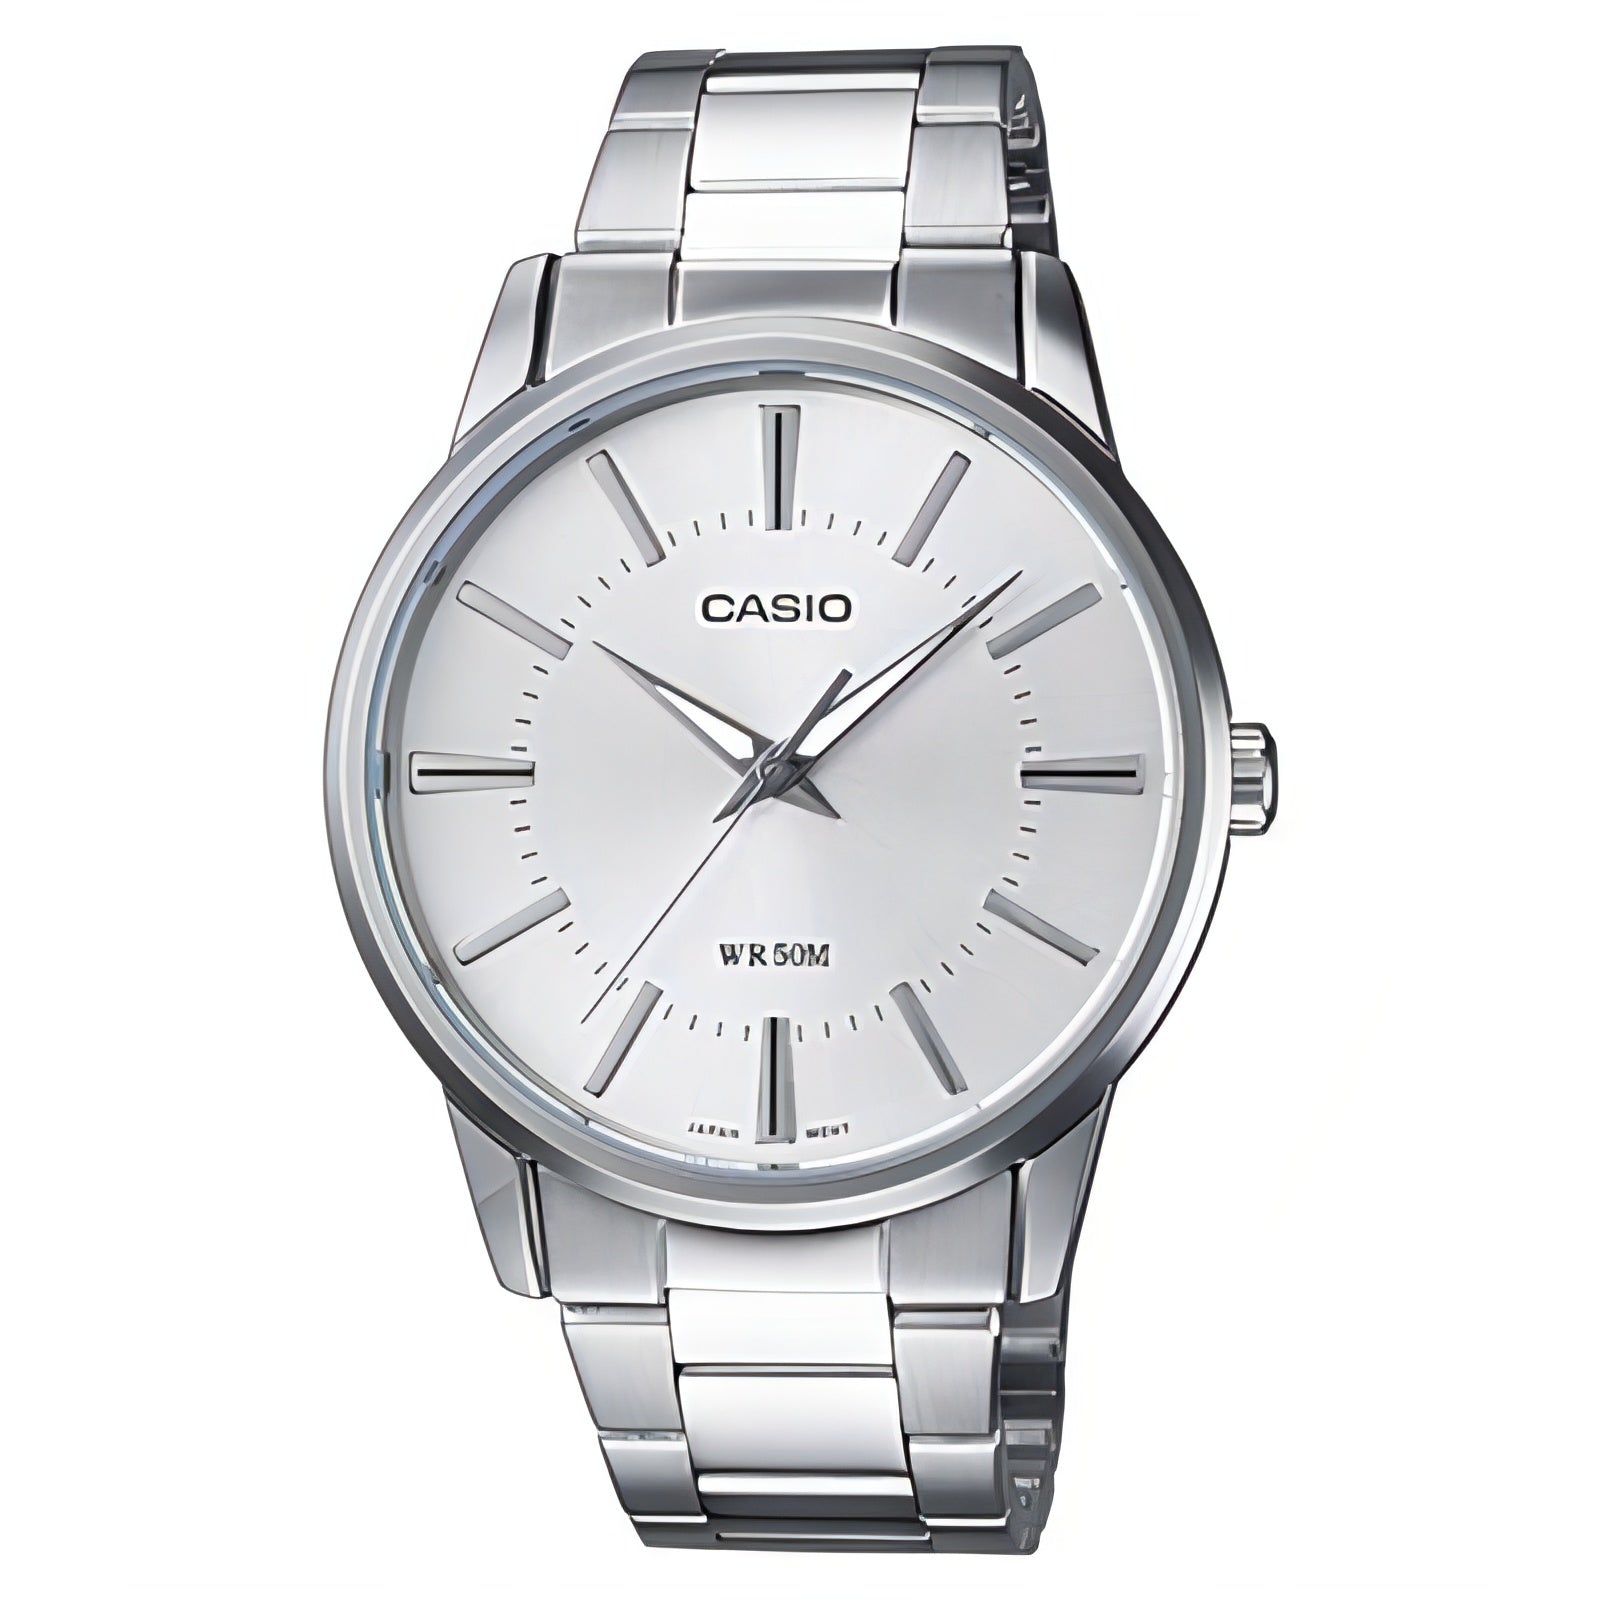 Casio EAW-MTP-1303D-7AV Men's Analog Watch | Classic Analog Watch | Men's Stainless Steel | White Dial | Fold-over Clasp | Elegant Men's Dress Watch | Affordable Men's Analog Watch | Halabh